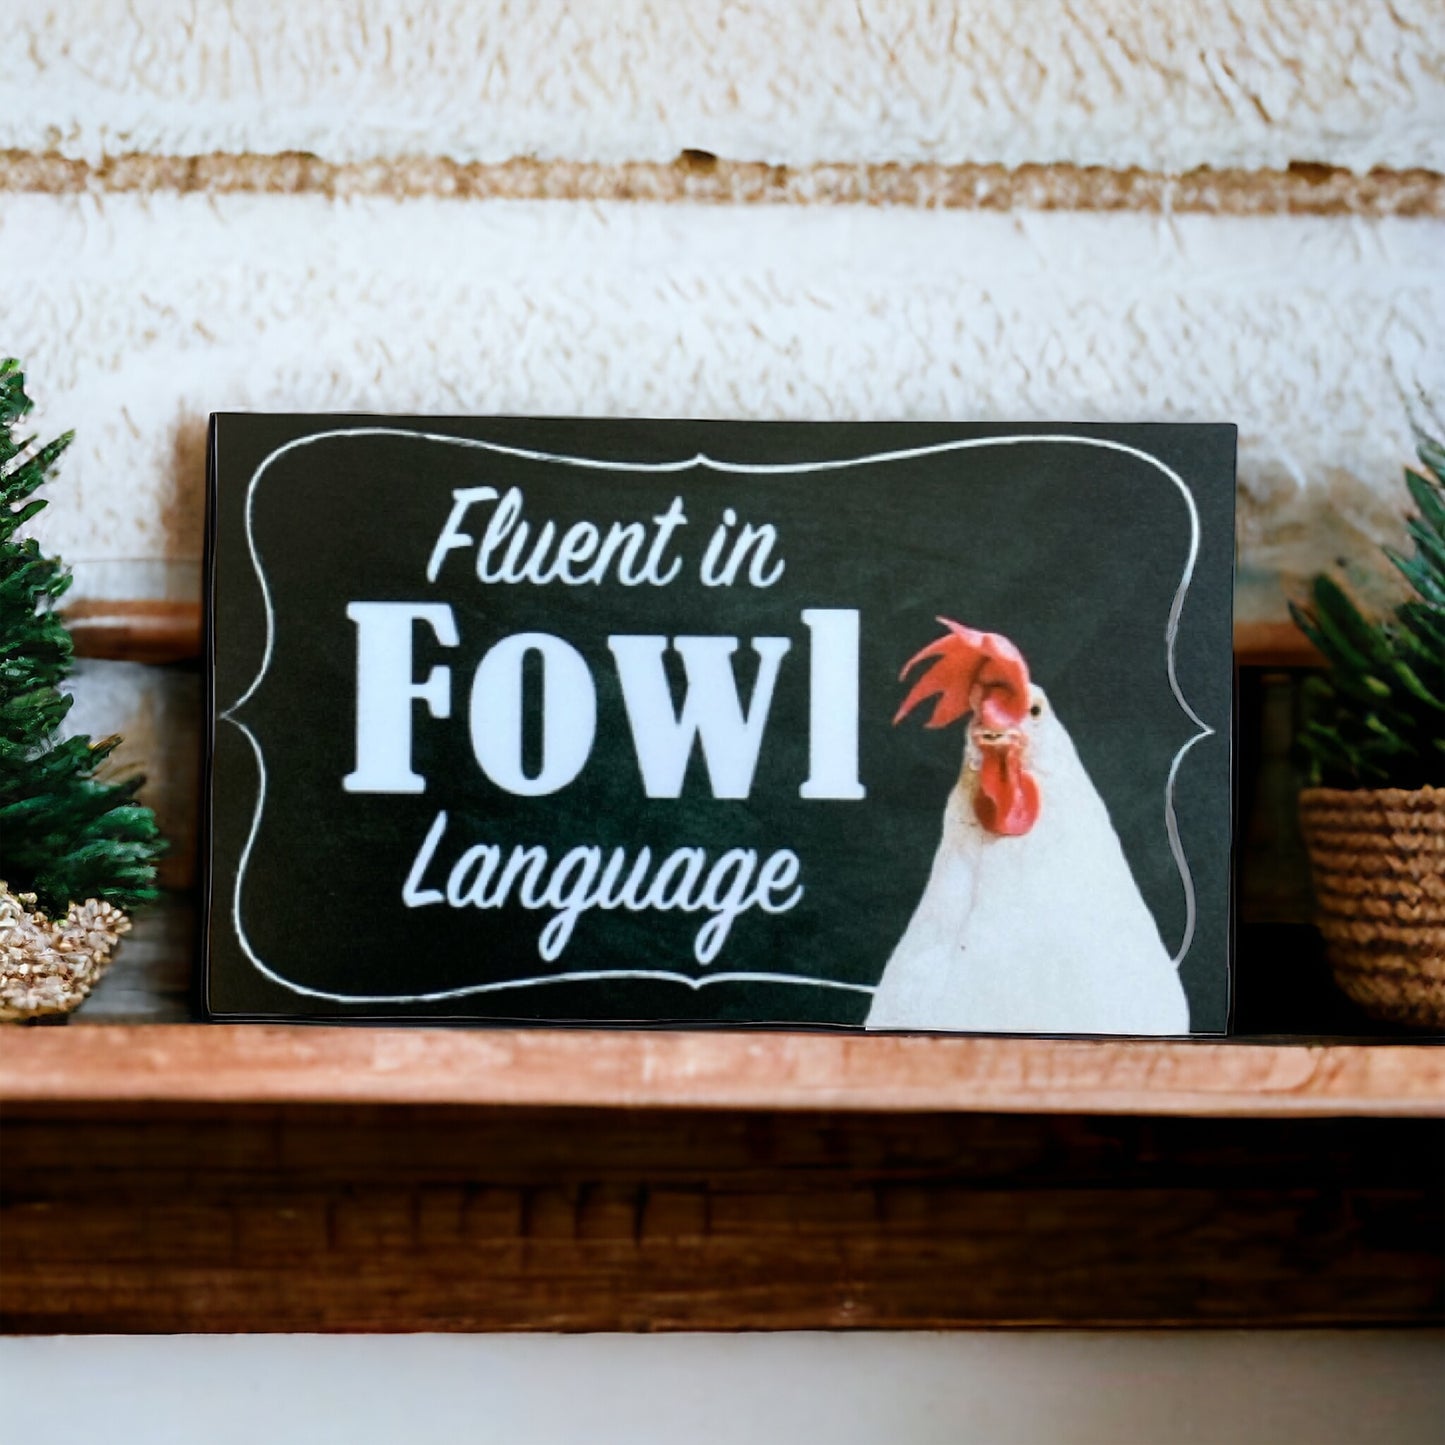 Fluent in Fowl Language Chicken Sign - The Renmy Store Homewares & Gifts 